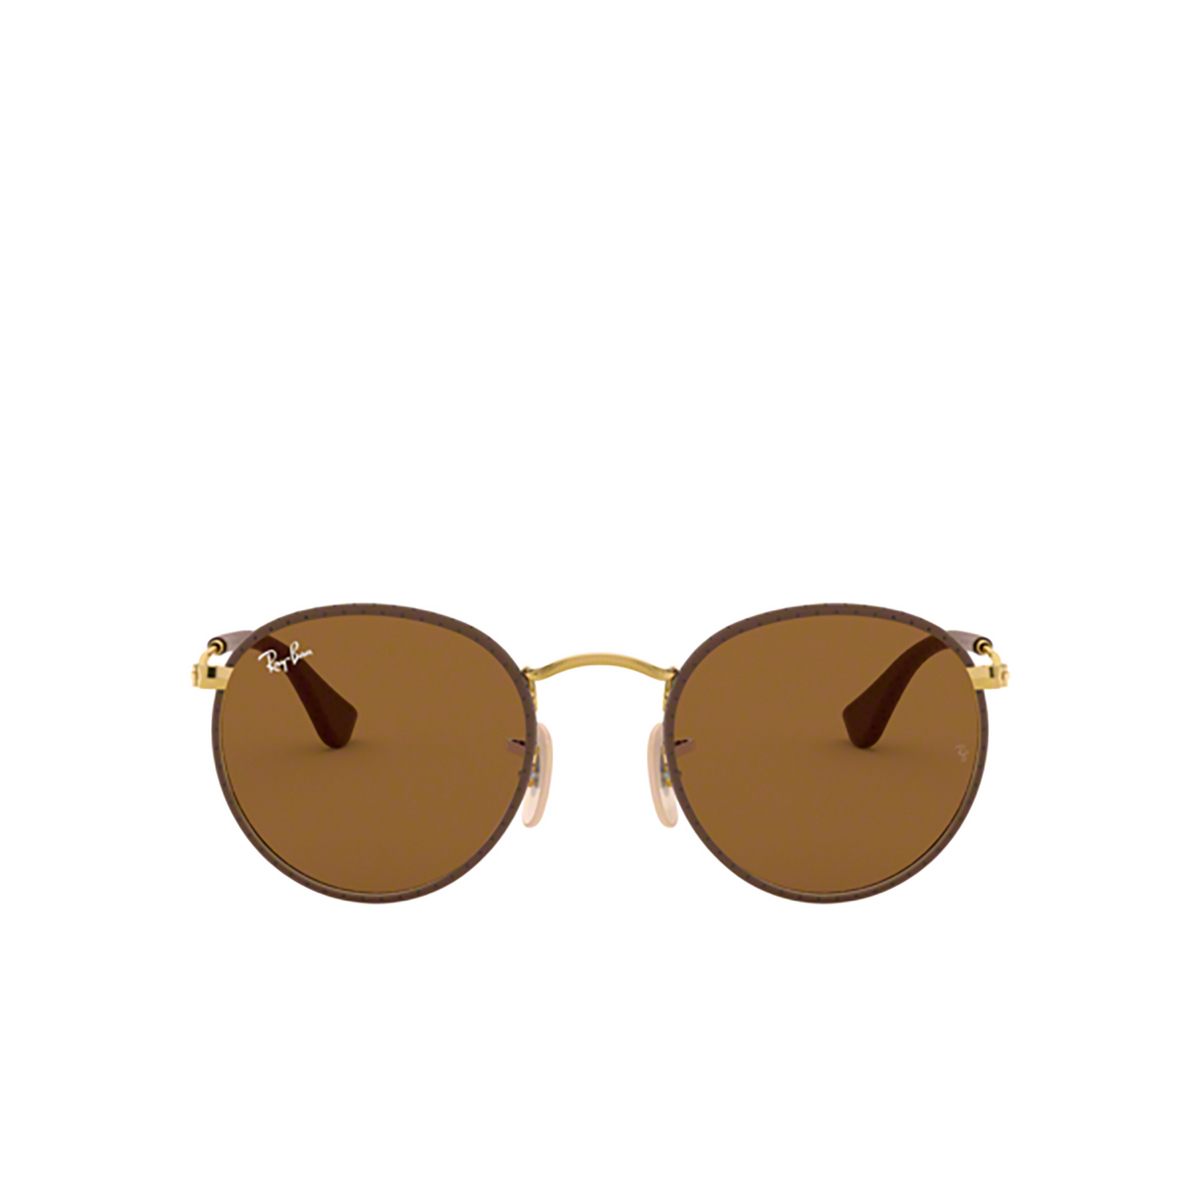 Occhiali da sole Ray-Ban ROUND CRAFT 9041 Leather Brown - frontale